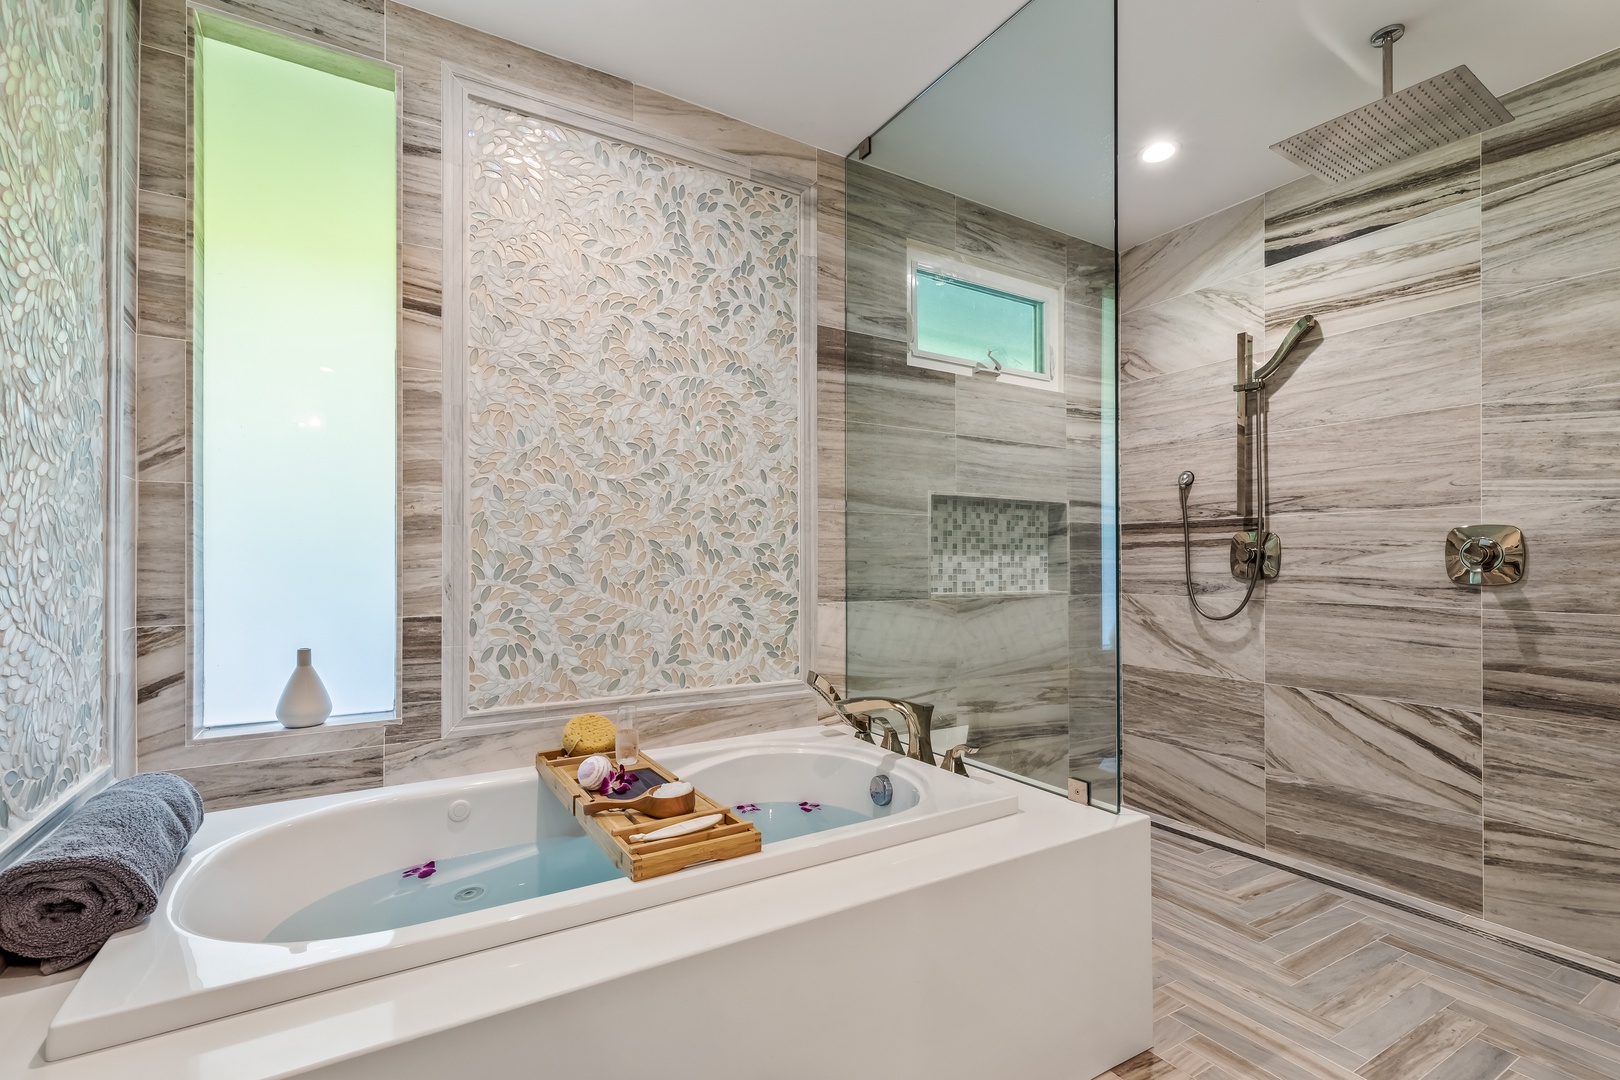 Honolulu Vacation Rentals, Hale Ola - The jacuzzi tub is the perfect spot to relax at the end of a beach day